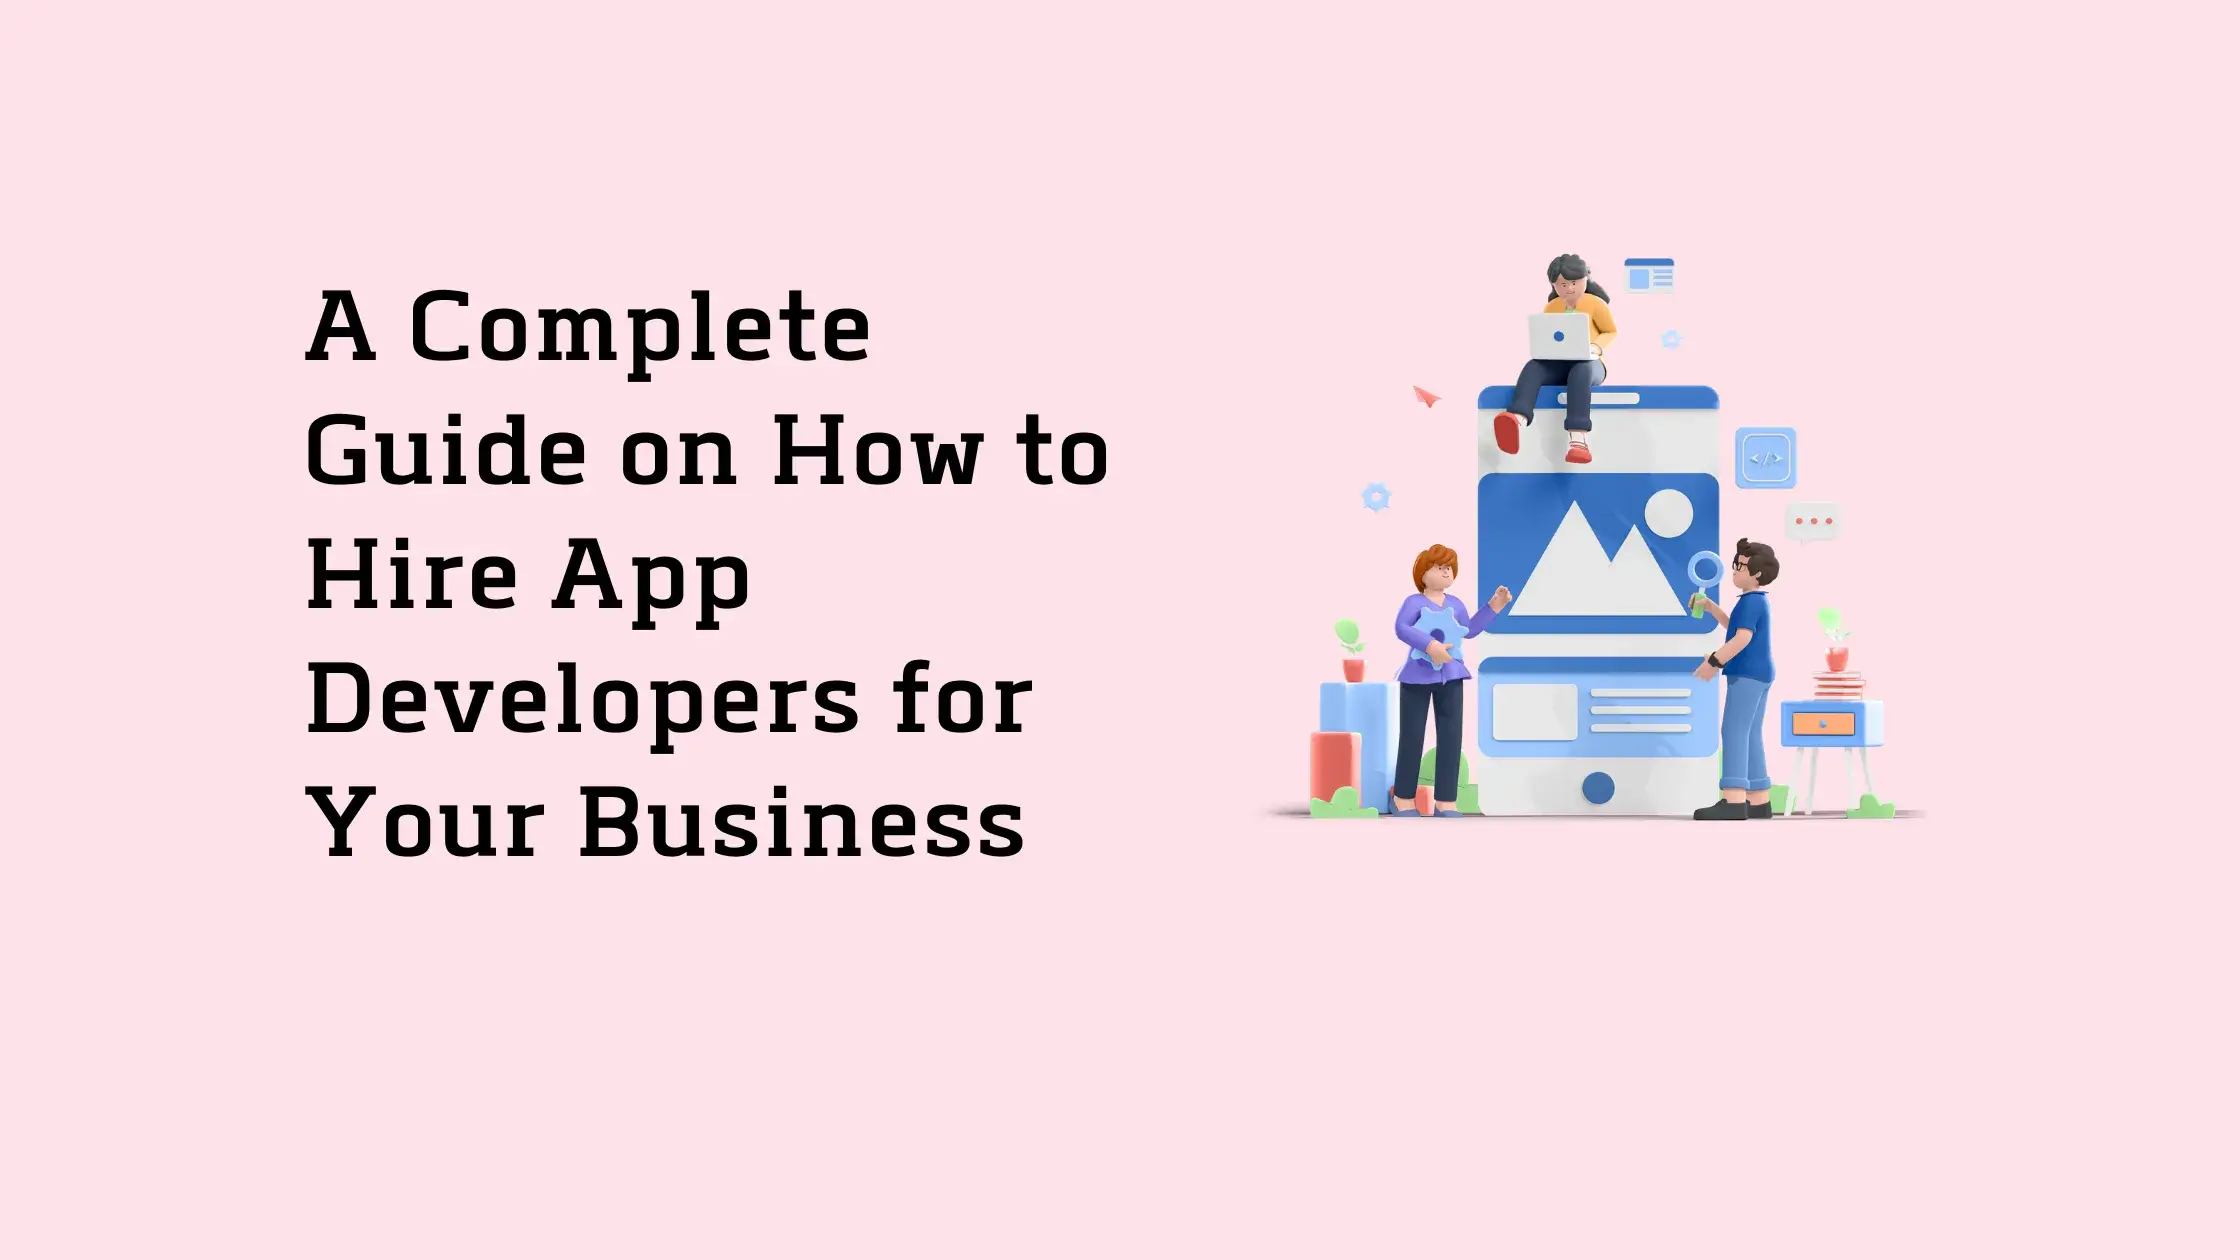 A-Complete-Guide-on-How-to-Hire-App-Developers-for-Your-Business